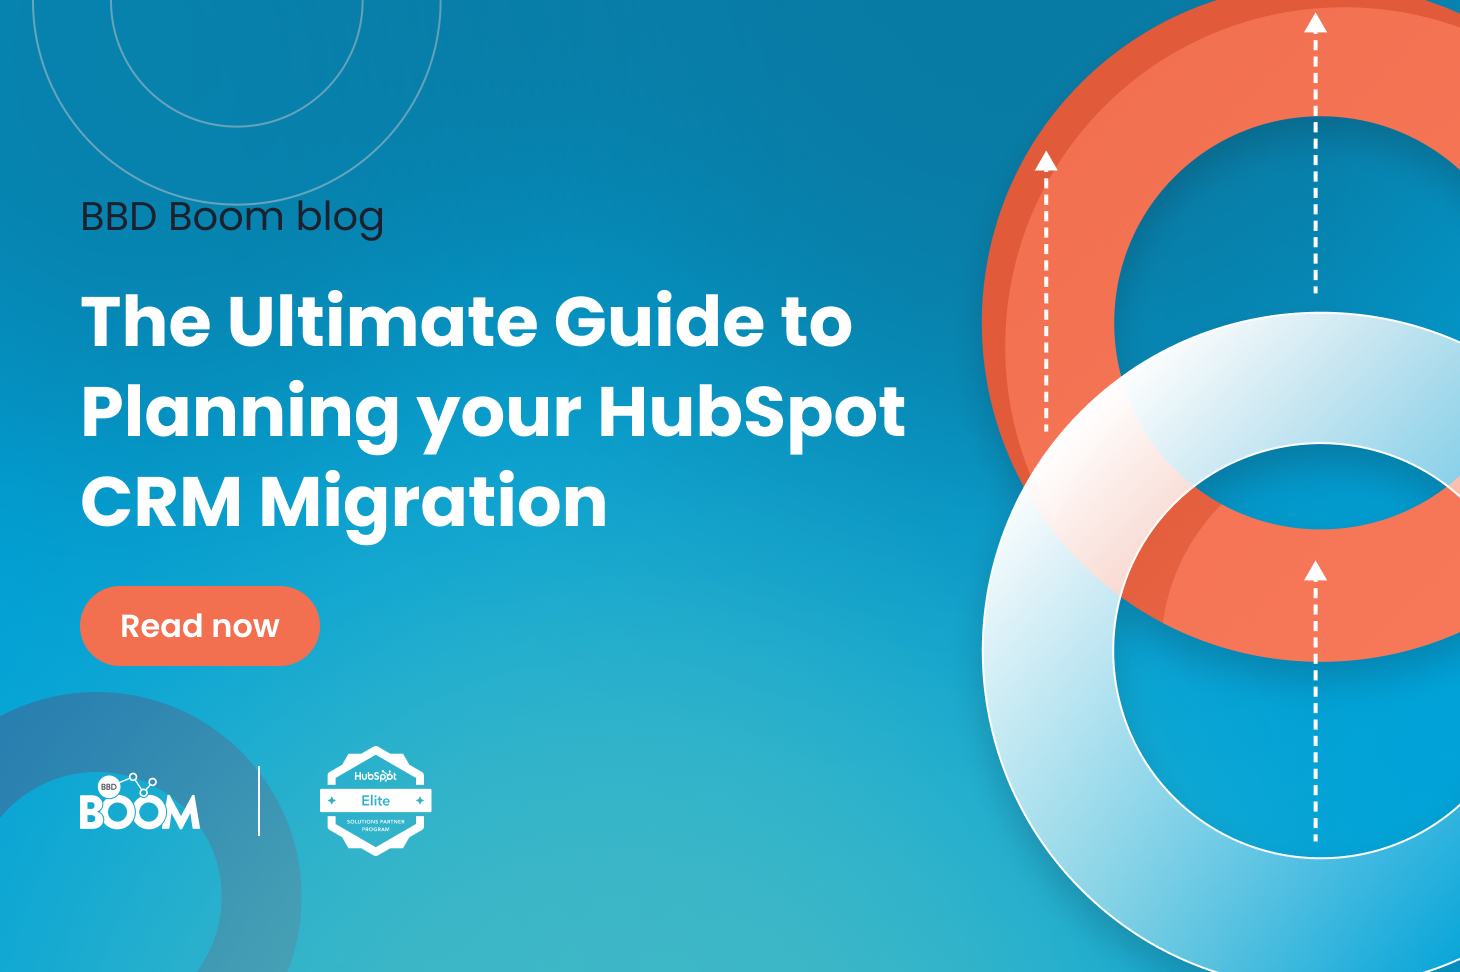 The Ultimate Guide to Planning Your HubSpot CRM Migration